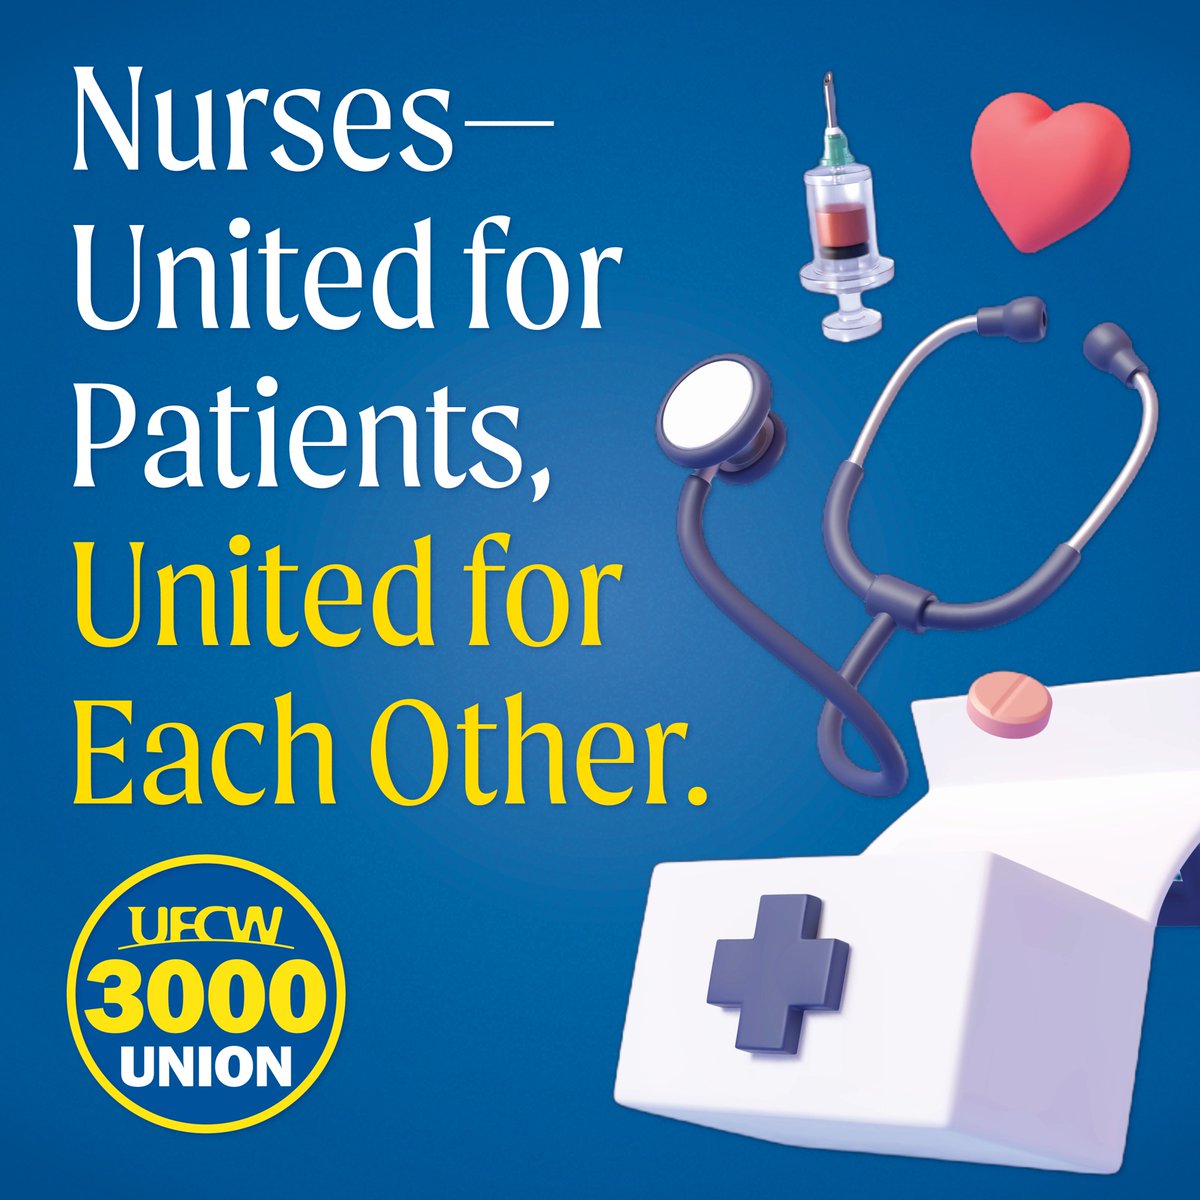 This is national nurses week and a good time reflect on how much EVERYONE depends on registered nurses for lifesaving and live delivering care. They stand together so they can stand by us! #NationalNursesWeek #Nurses #SafeStaffing #HealthcareWorkers #Solidarity #Healthcare